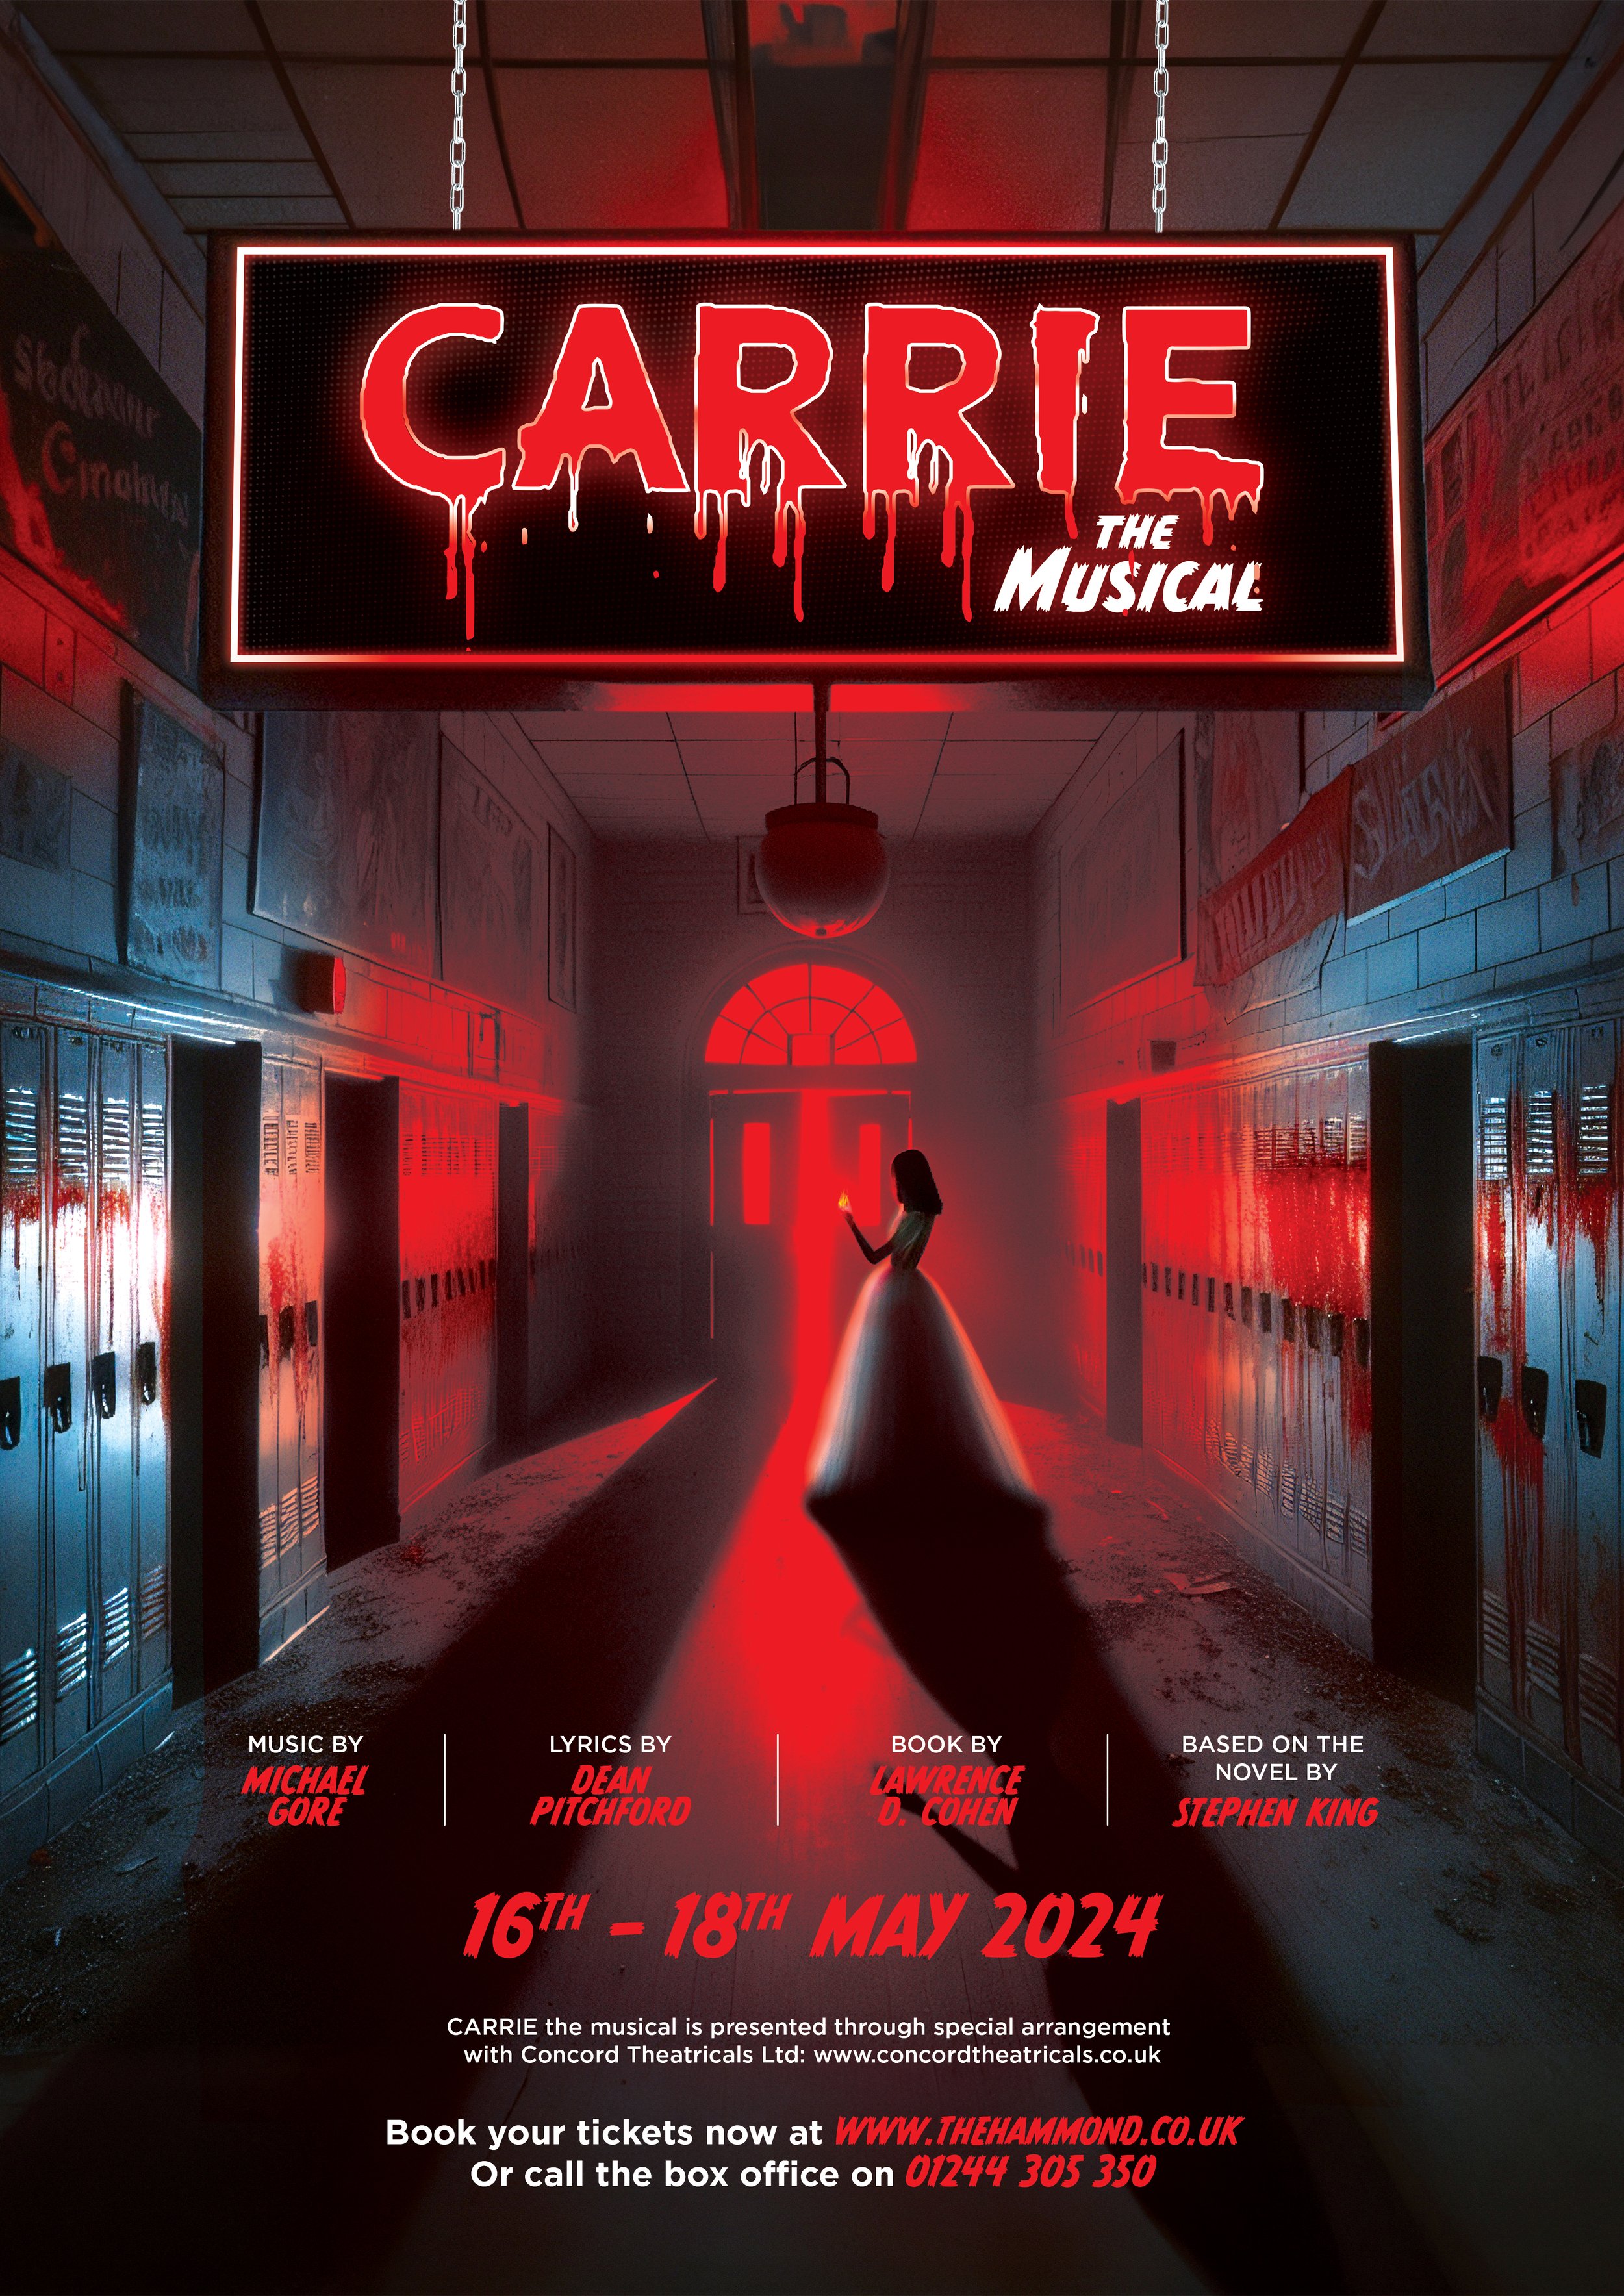 TS01073-Carrie-Event-Poster-WEB-HIGHRES.jpg